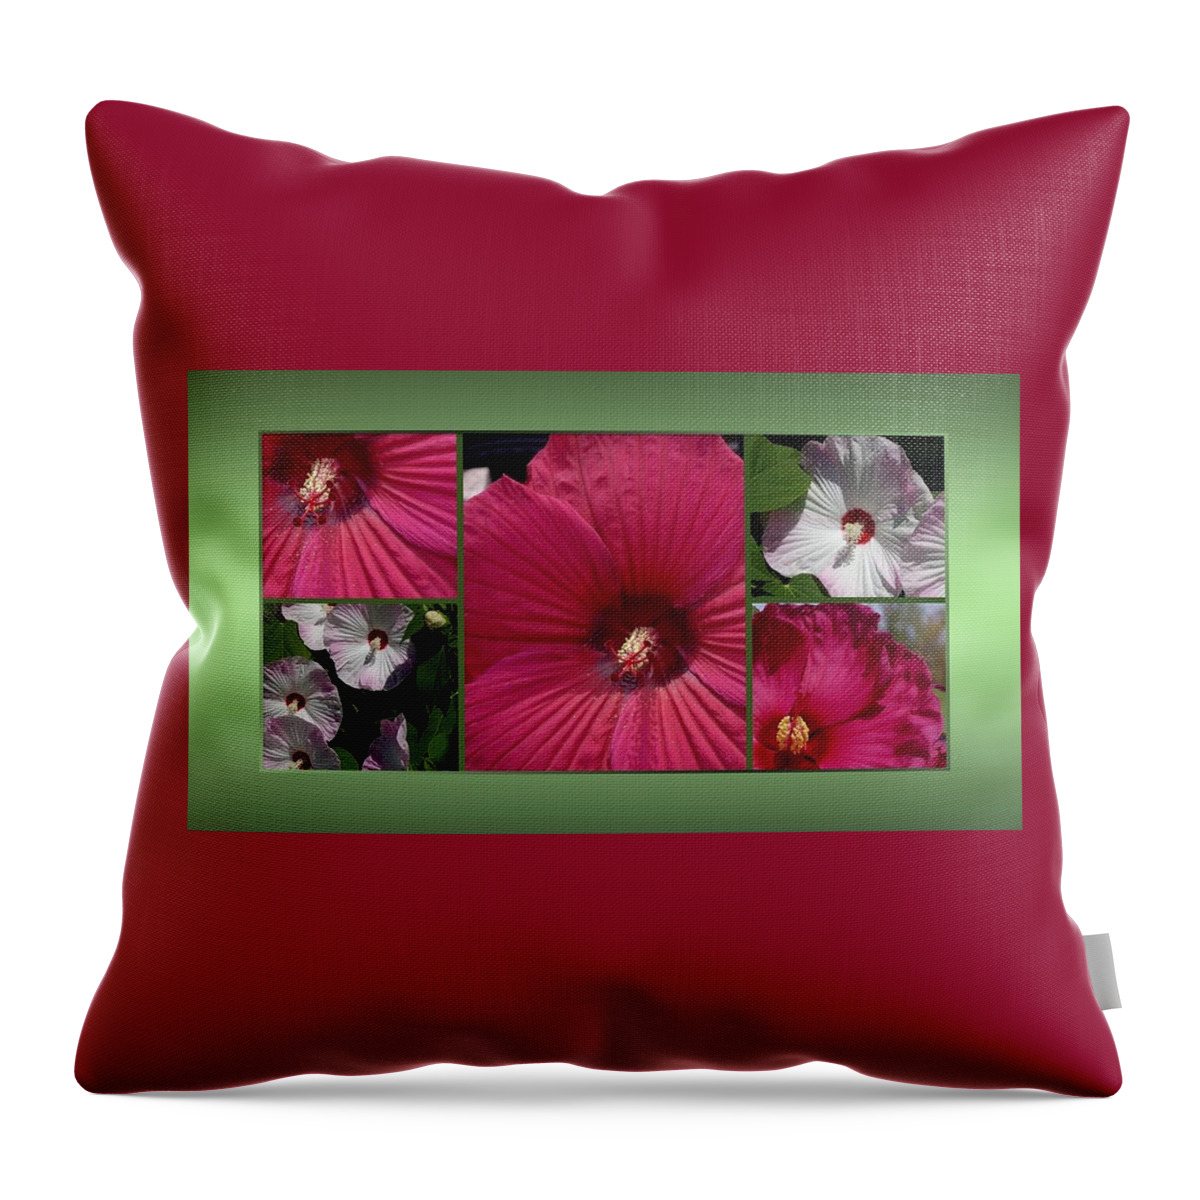 Hibiscus Throw Pillow featuring the photograph Hardy Hibiscus by Nancy Ayanna Wyatt